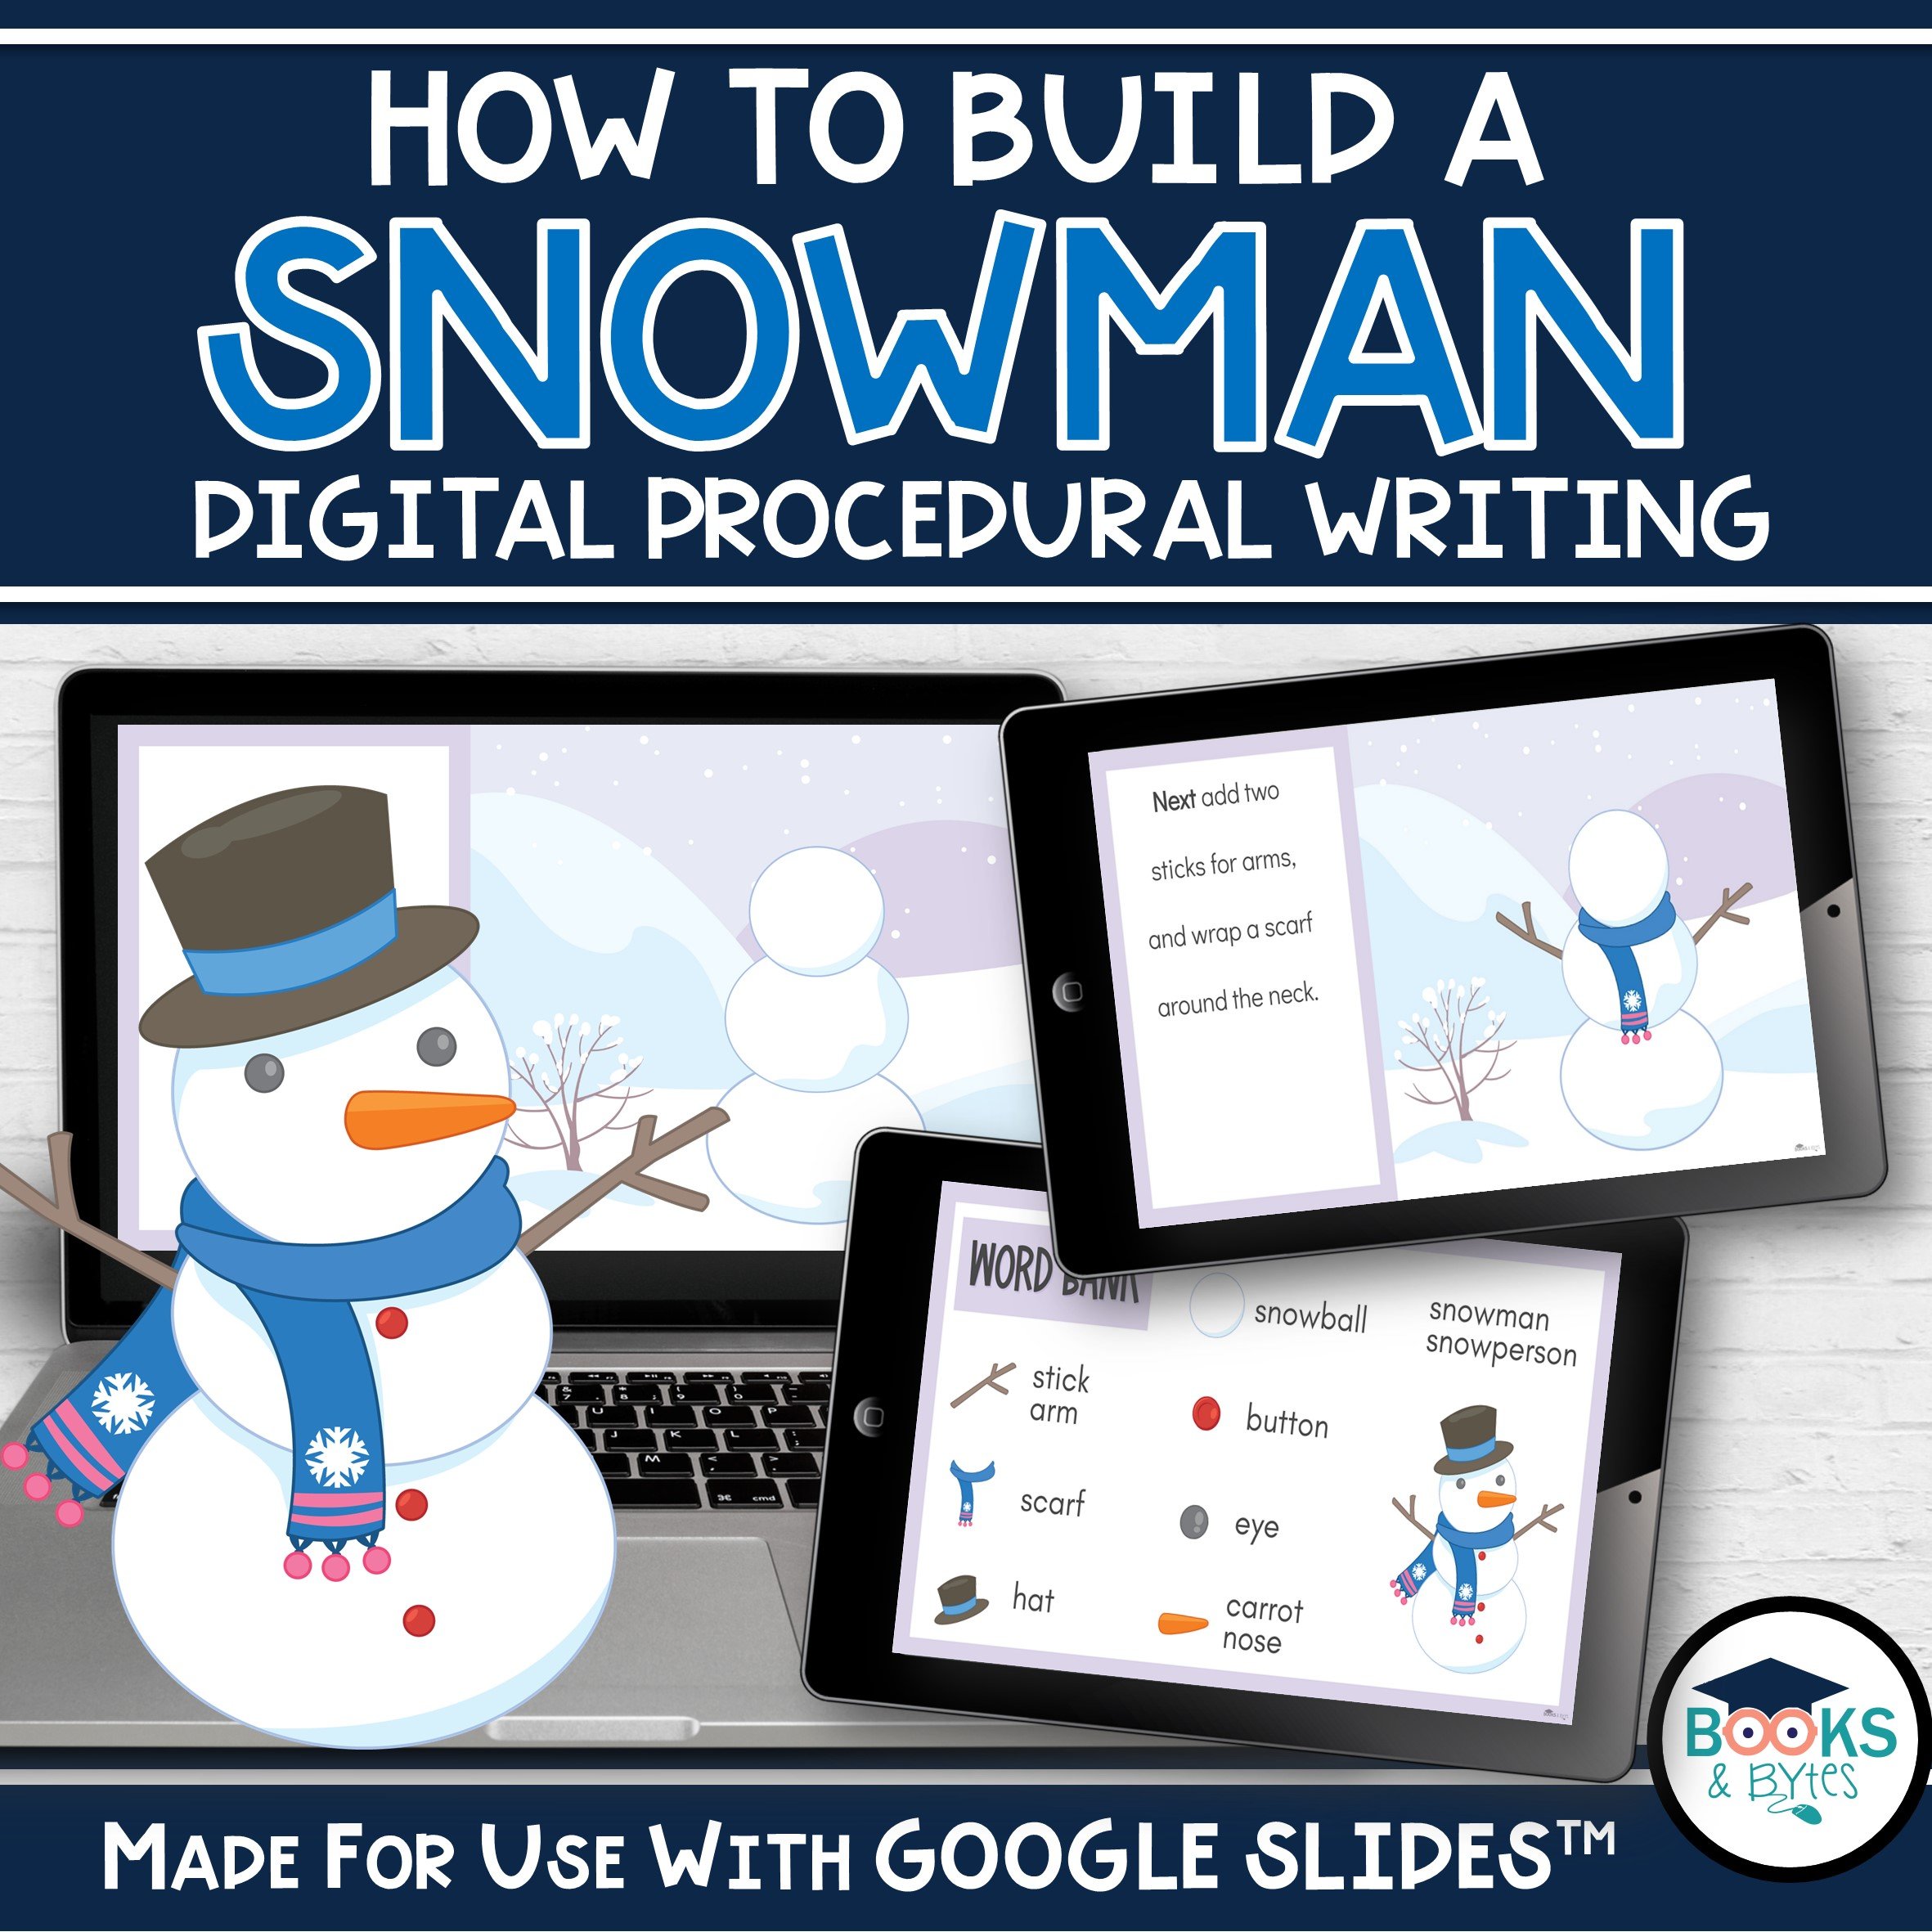 how to build a snowman cover.jpg